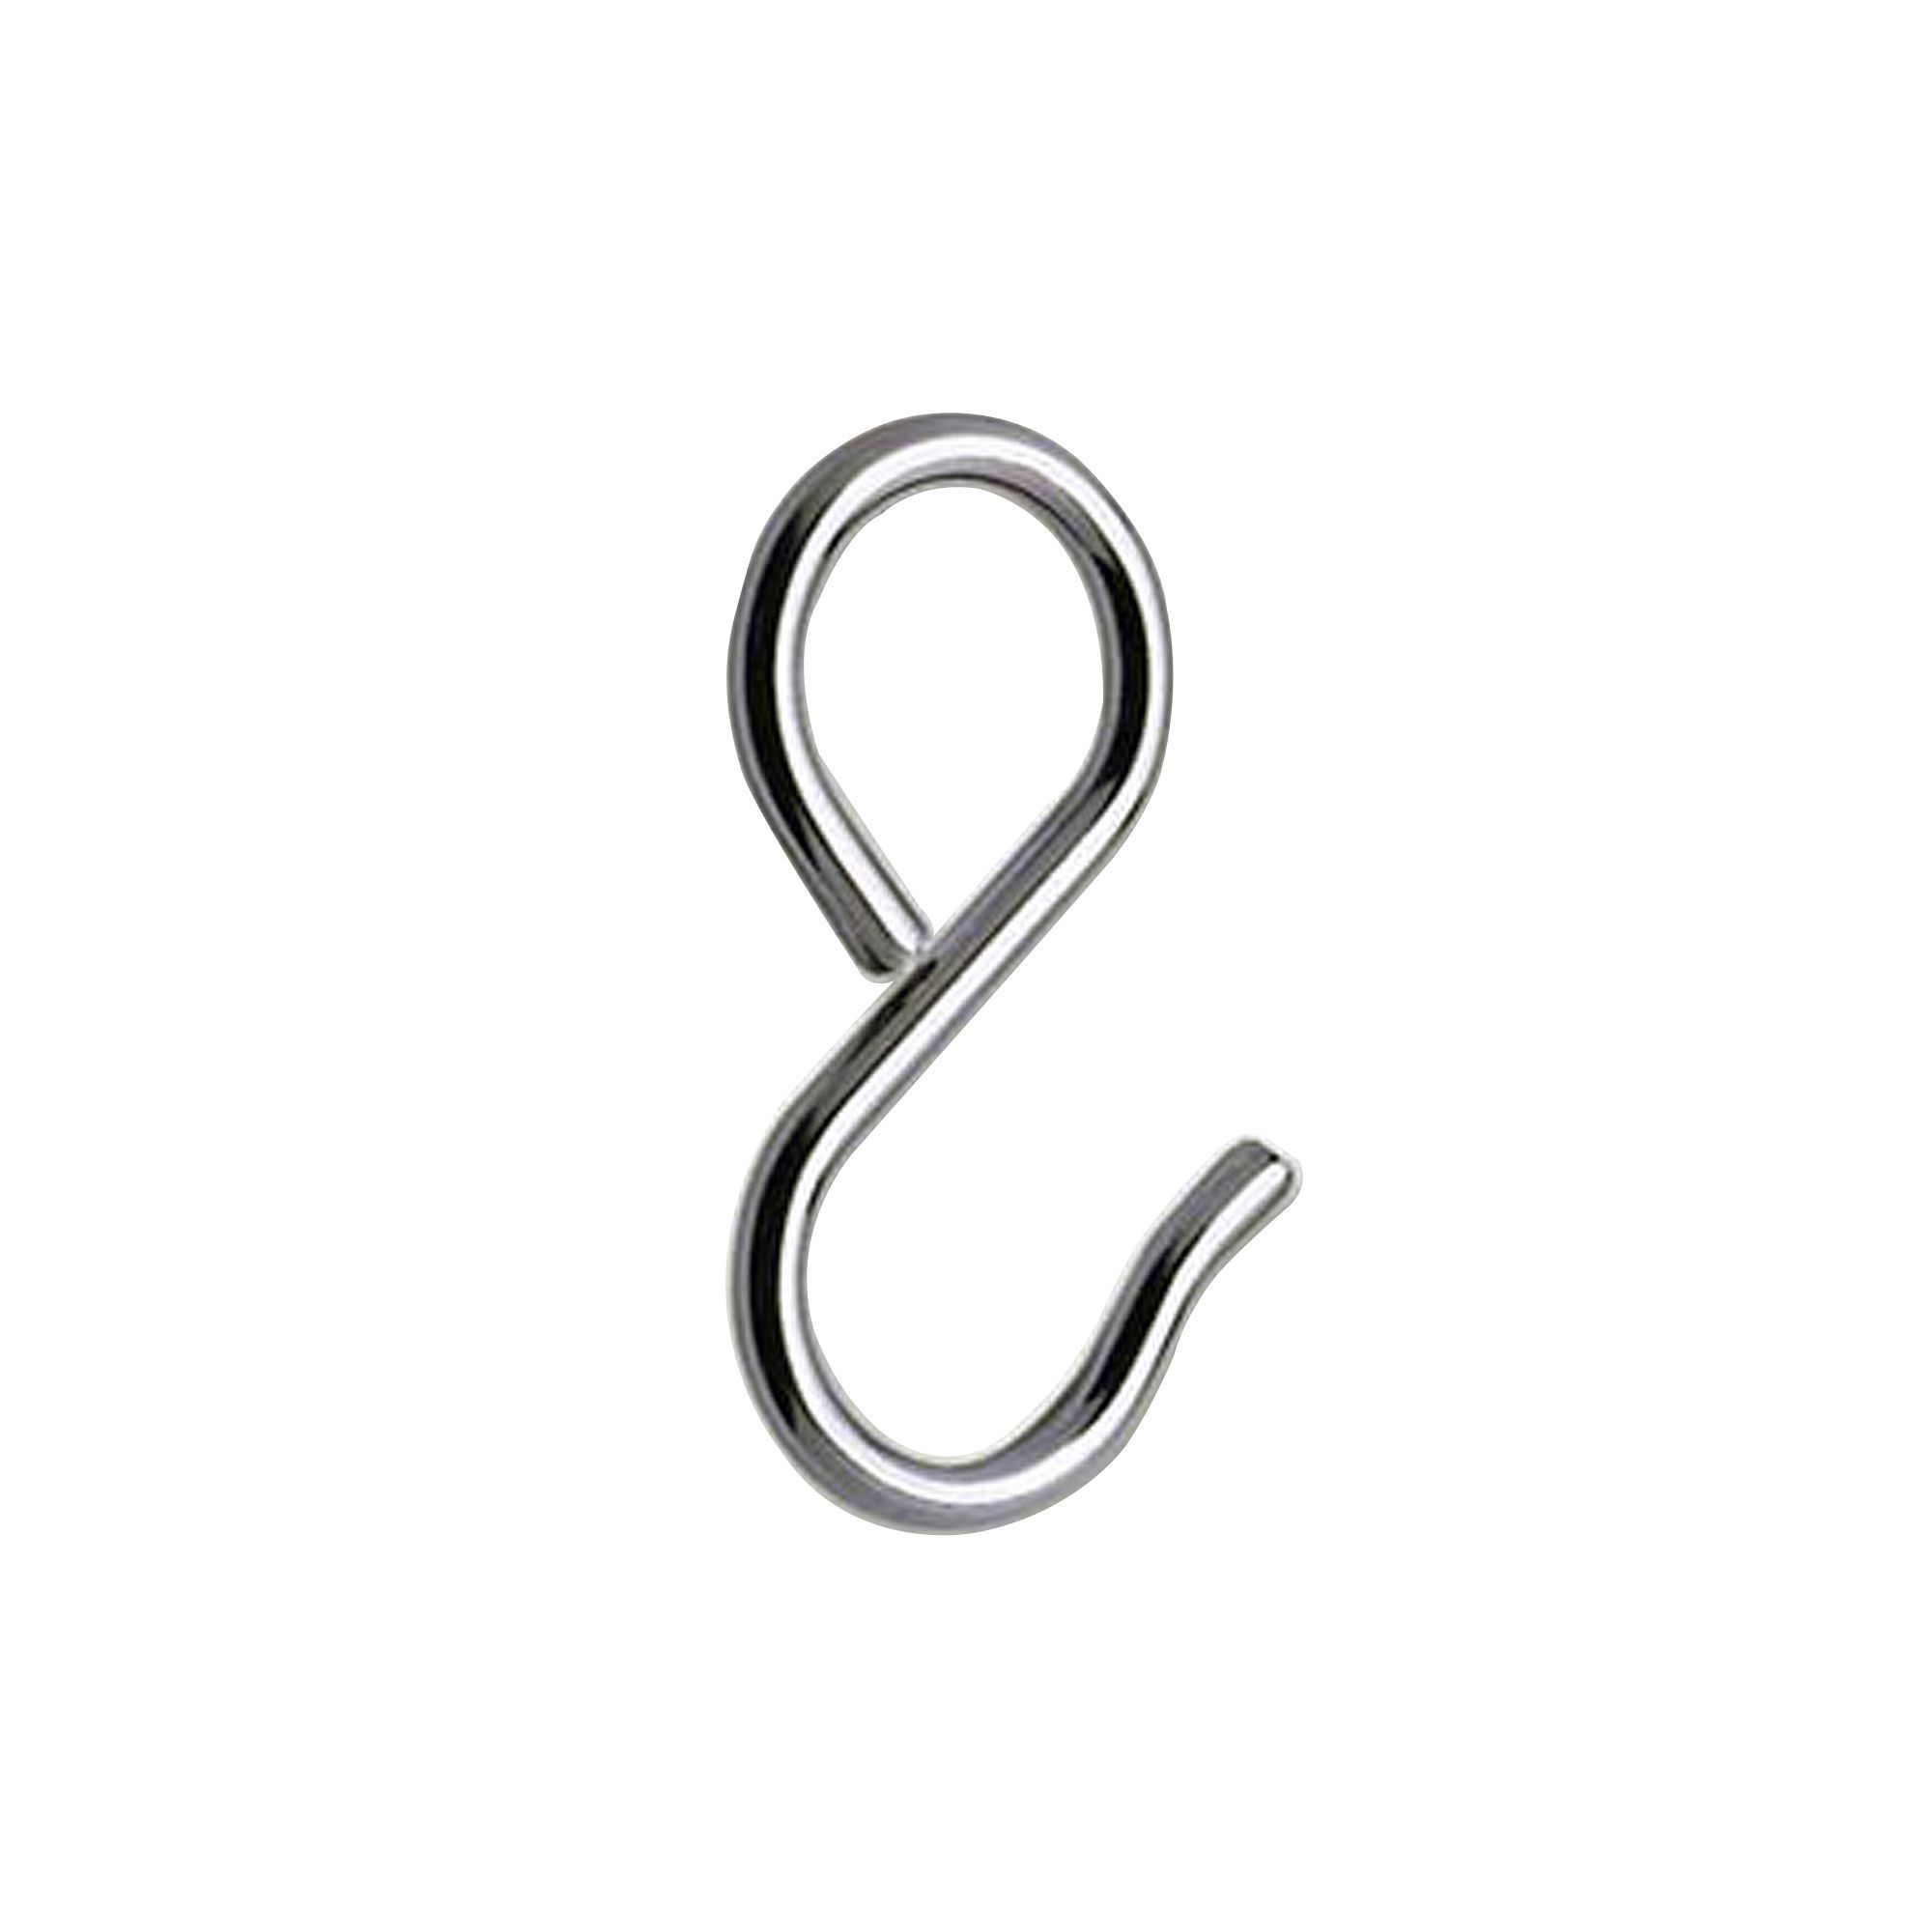 Rothley Colorail Chrome-Plated Steel Sliding S-Hook Pack of 4